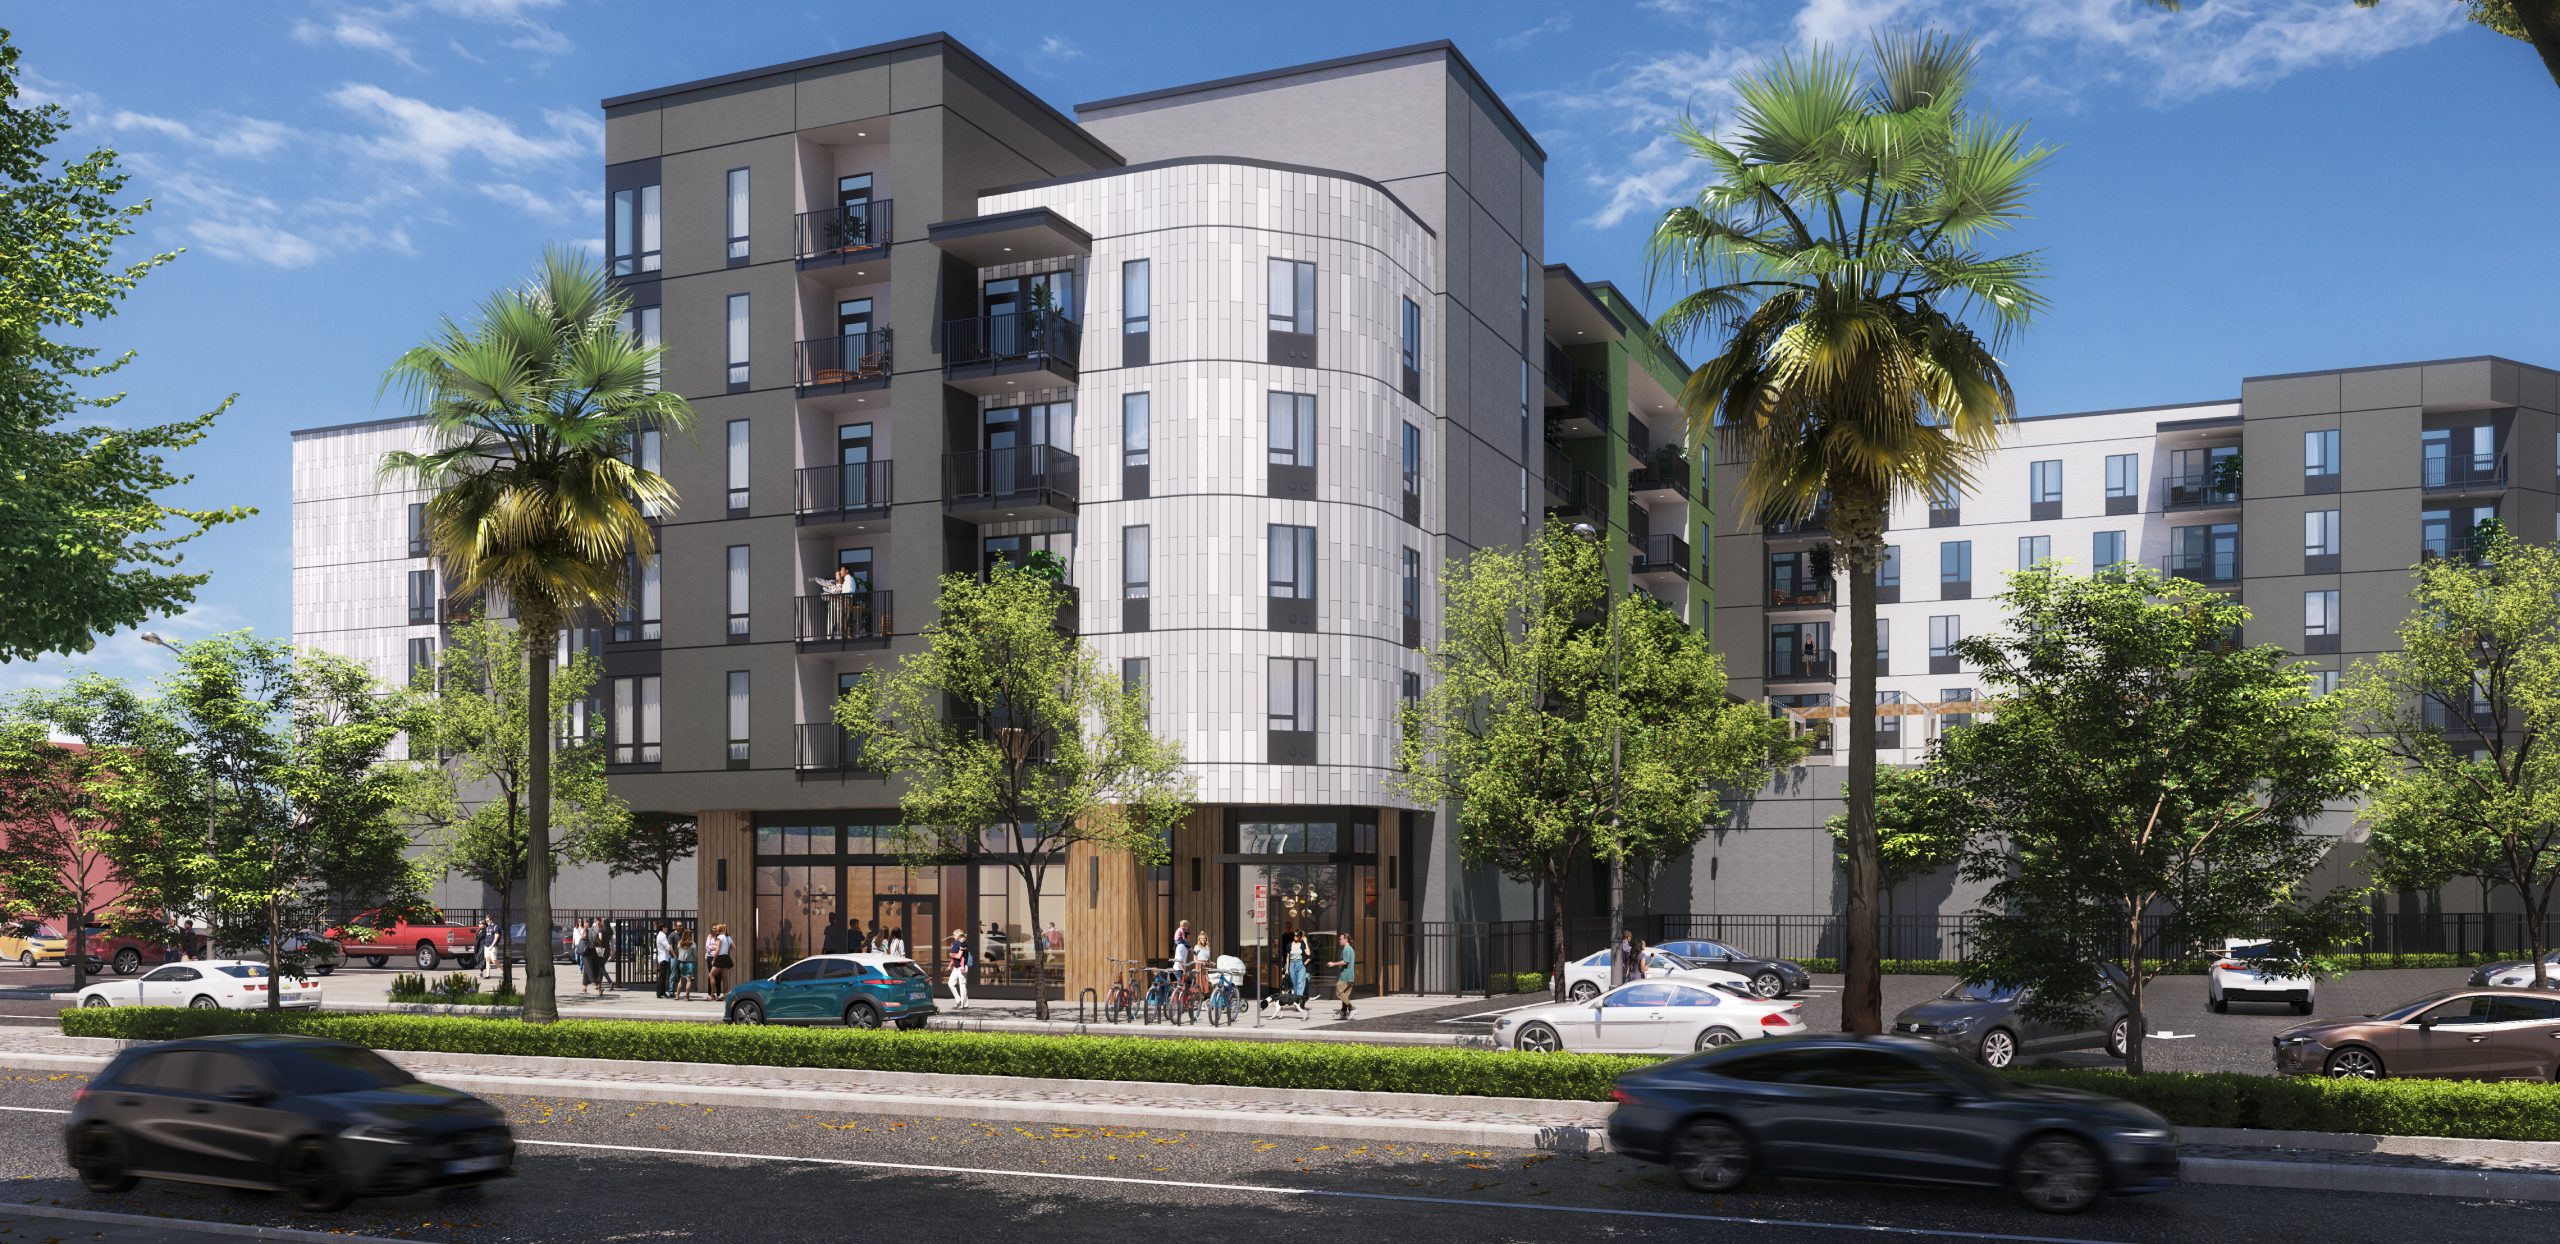 777 West San Carlos Street, rendering by SGPA Architecture & Planning